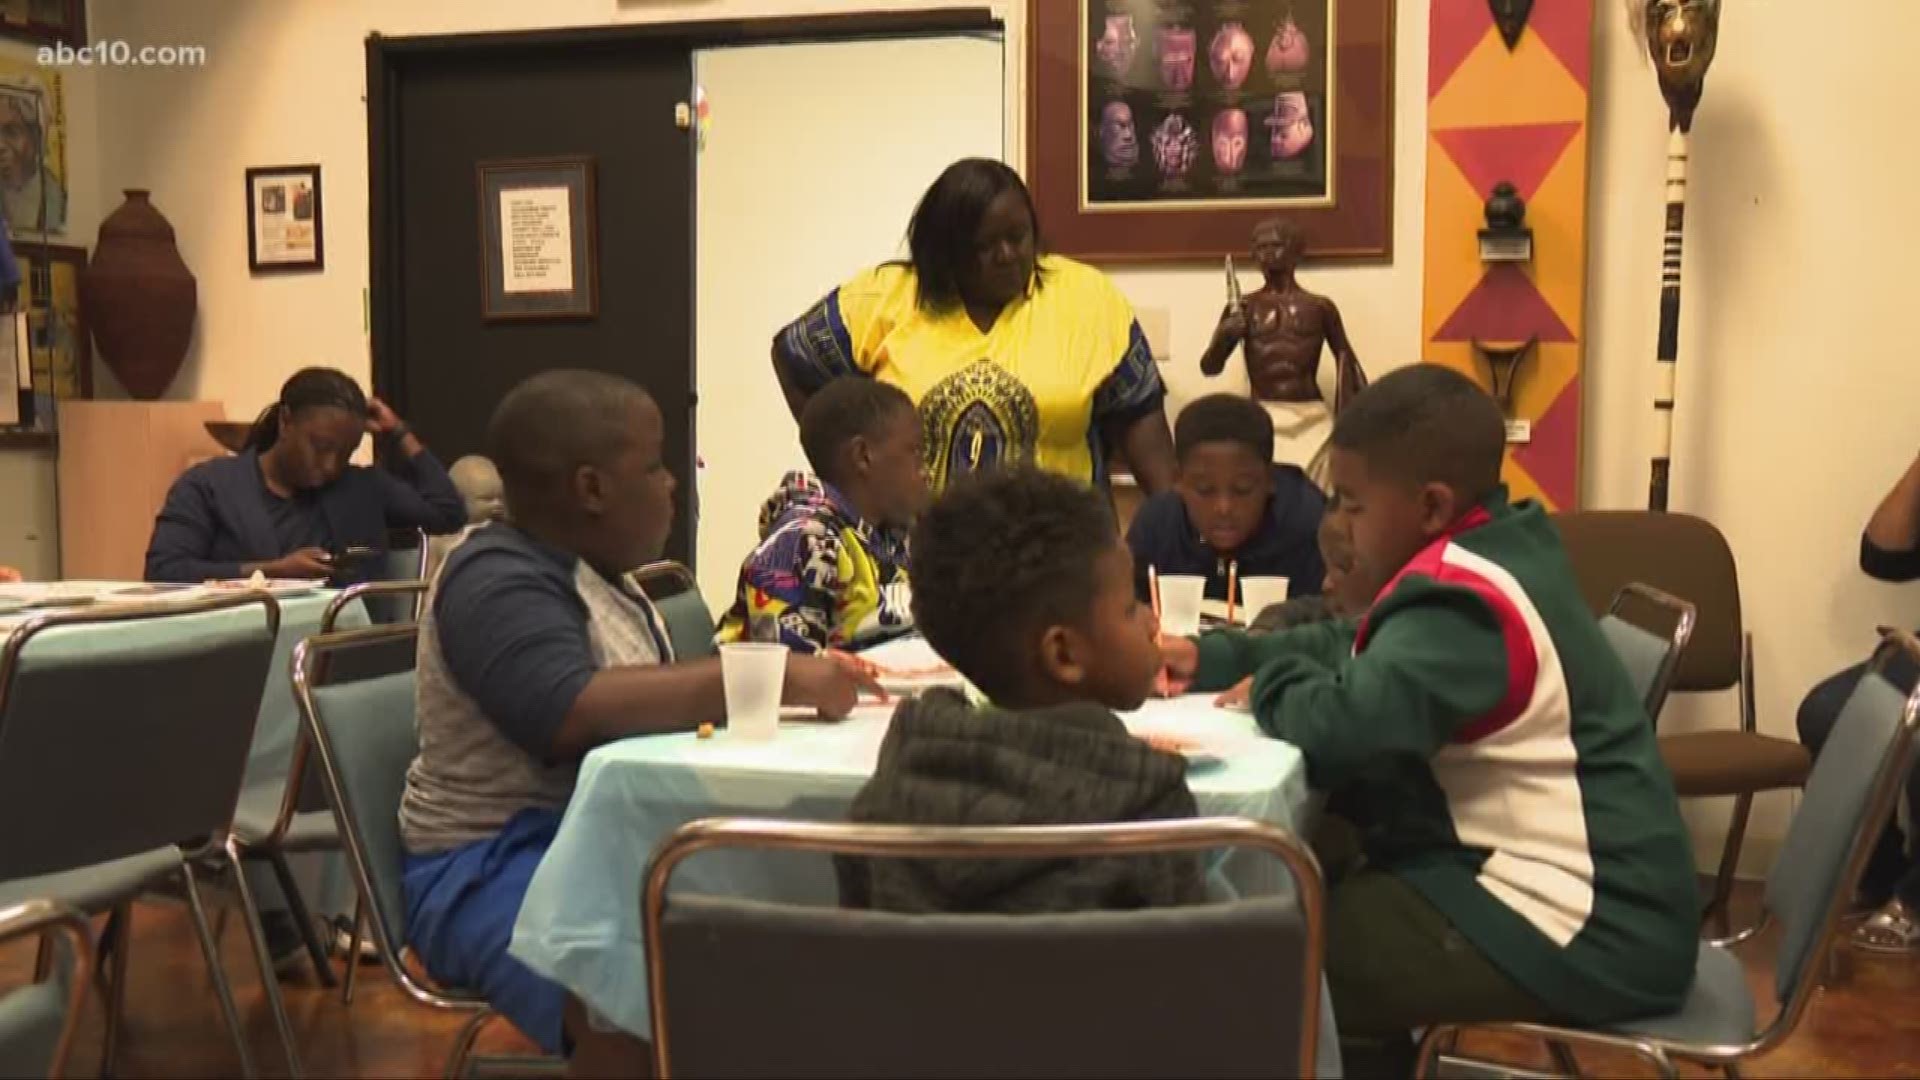 They call themselves the "Boys in the Hood Book Club." The group's organizers say it's all about getting young boys interested in reading and writing, as well as out of trouble. They all got together today and ABC10 was there.